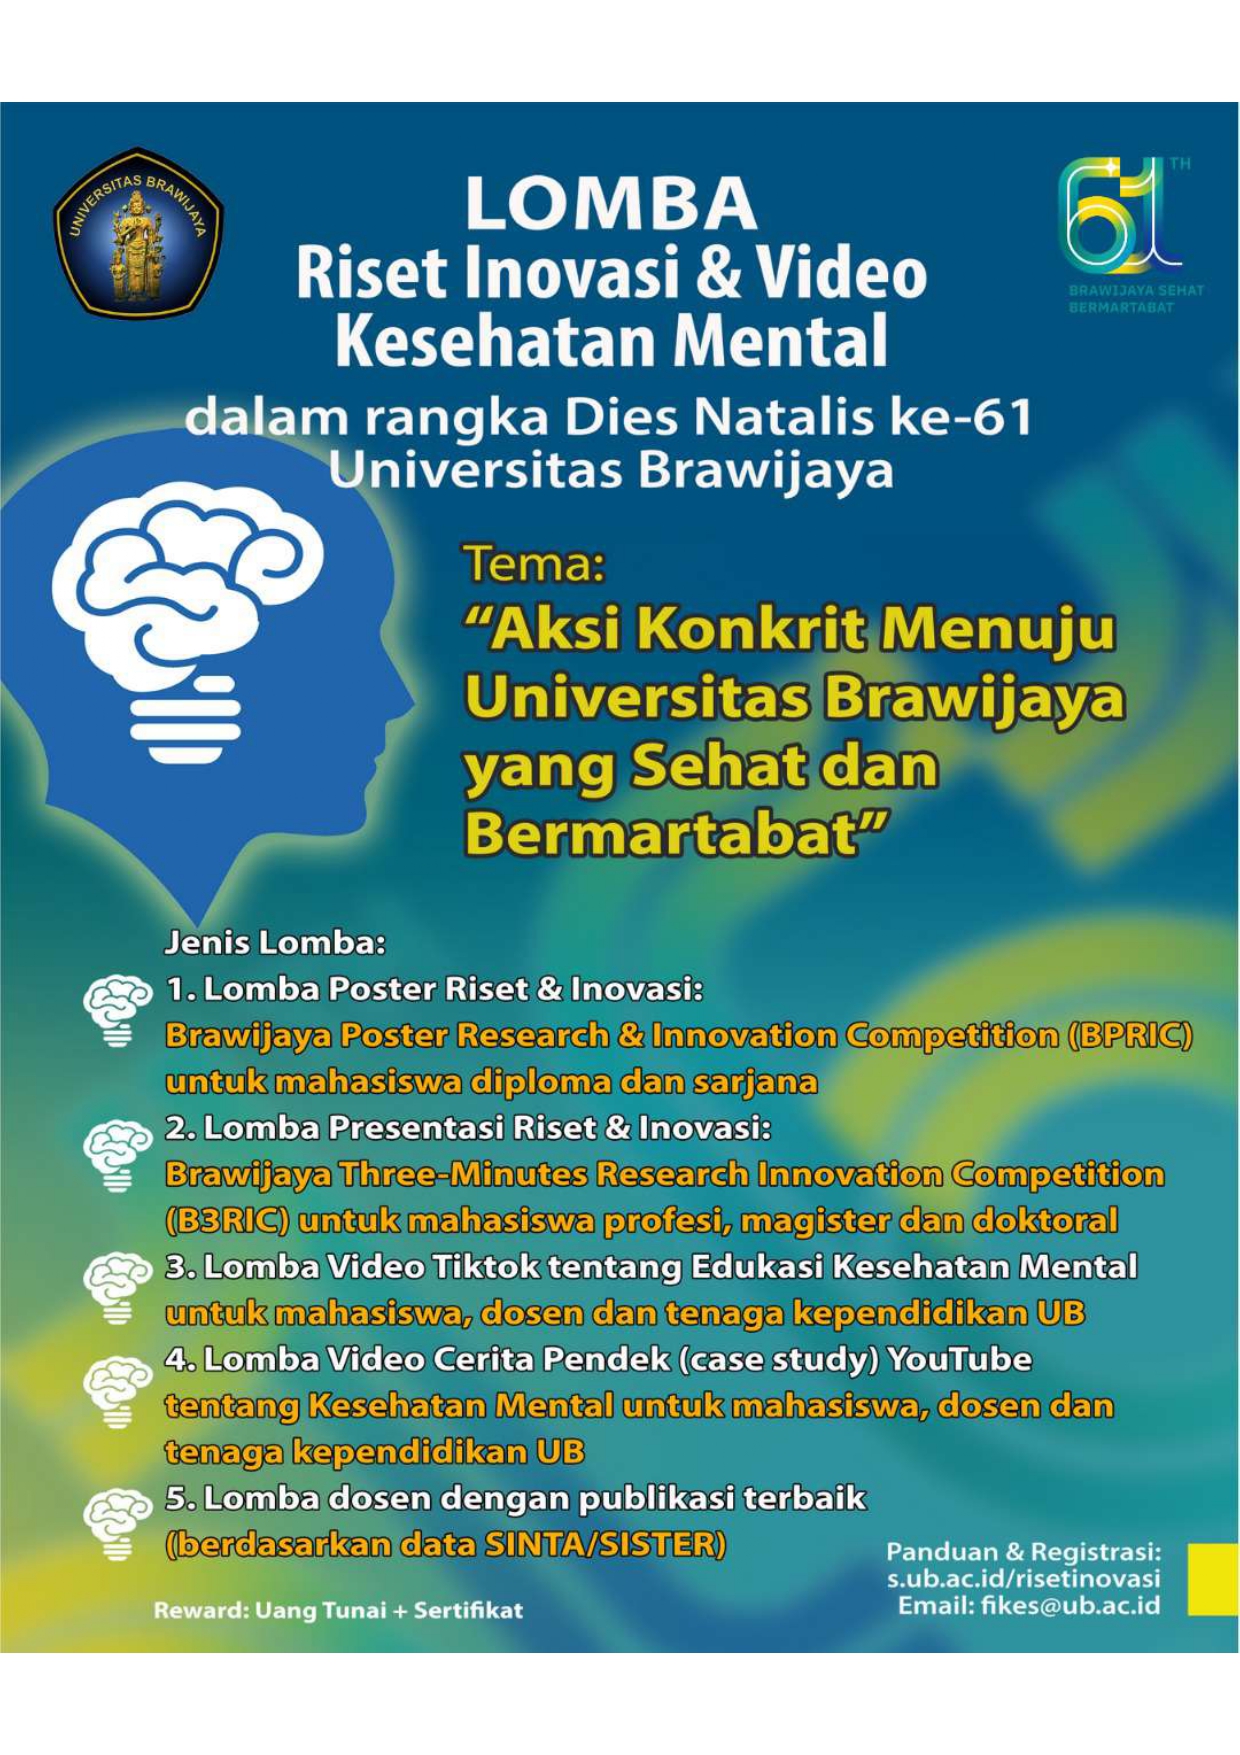 Mental Health Research and Innovation competition